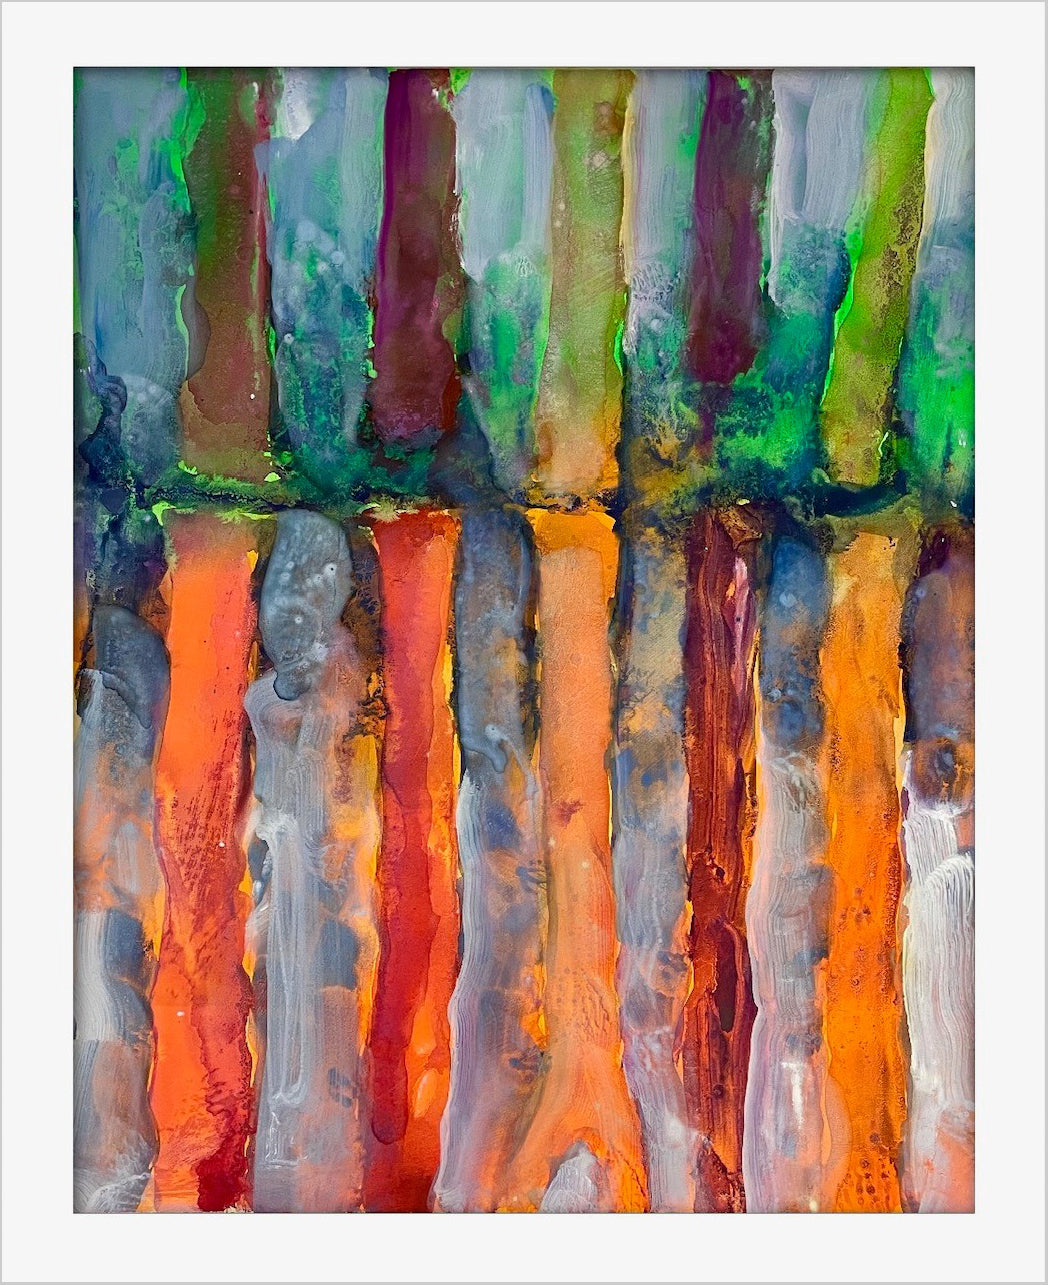 Simon Keenleyside 'Woods (green & orange)', 2021 Watercolour, spray paint, ink on Fabriano Artistico paper 640gsm 47x38cm